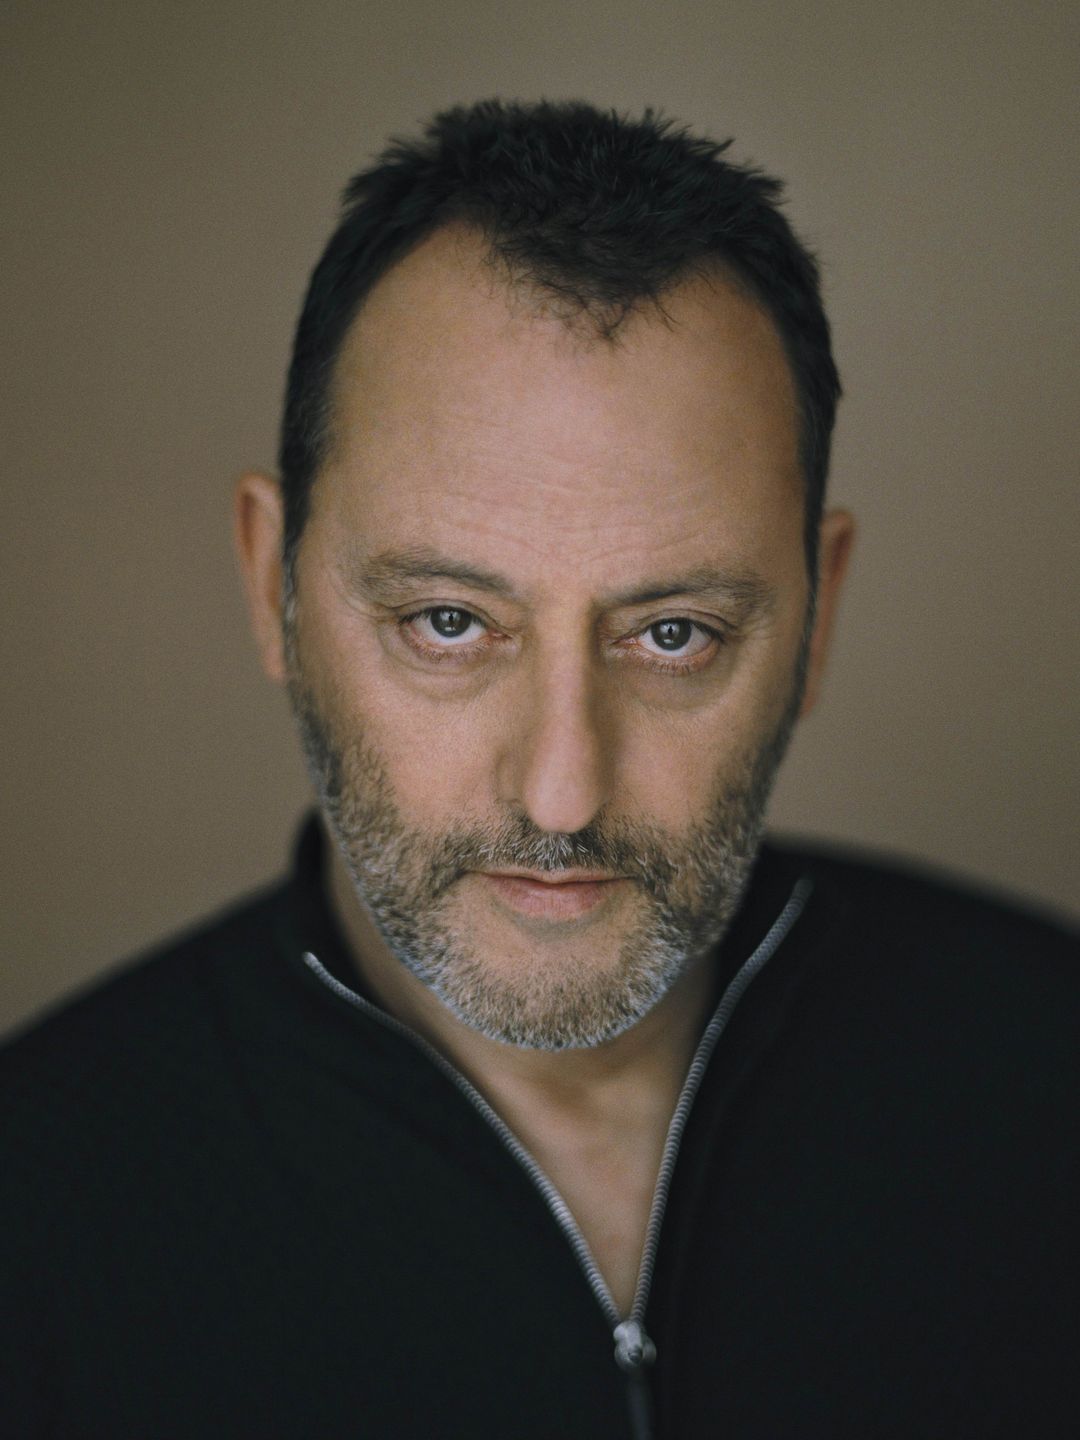 Jean Reno who is he